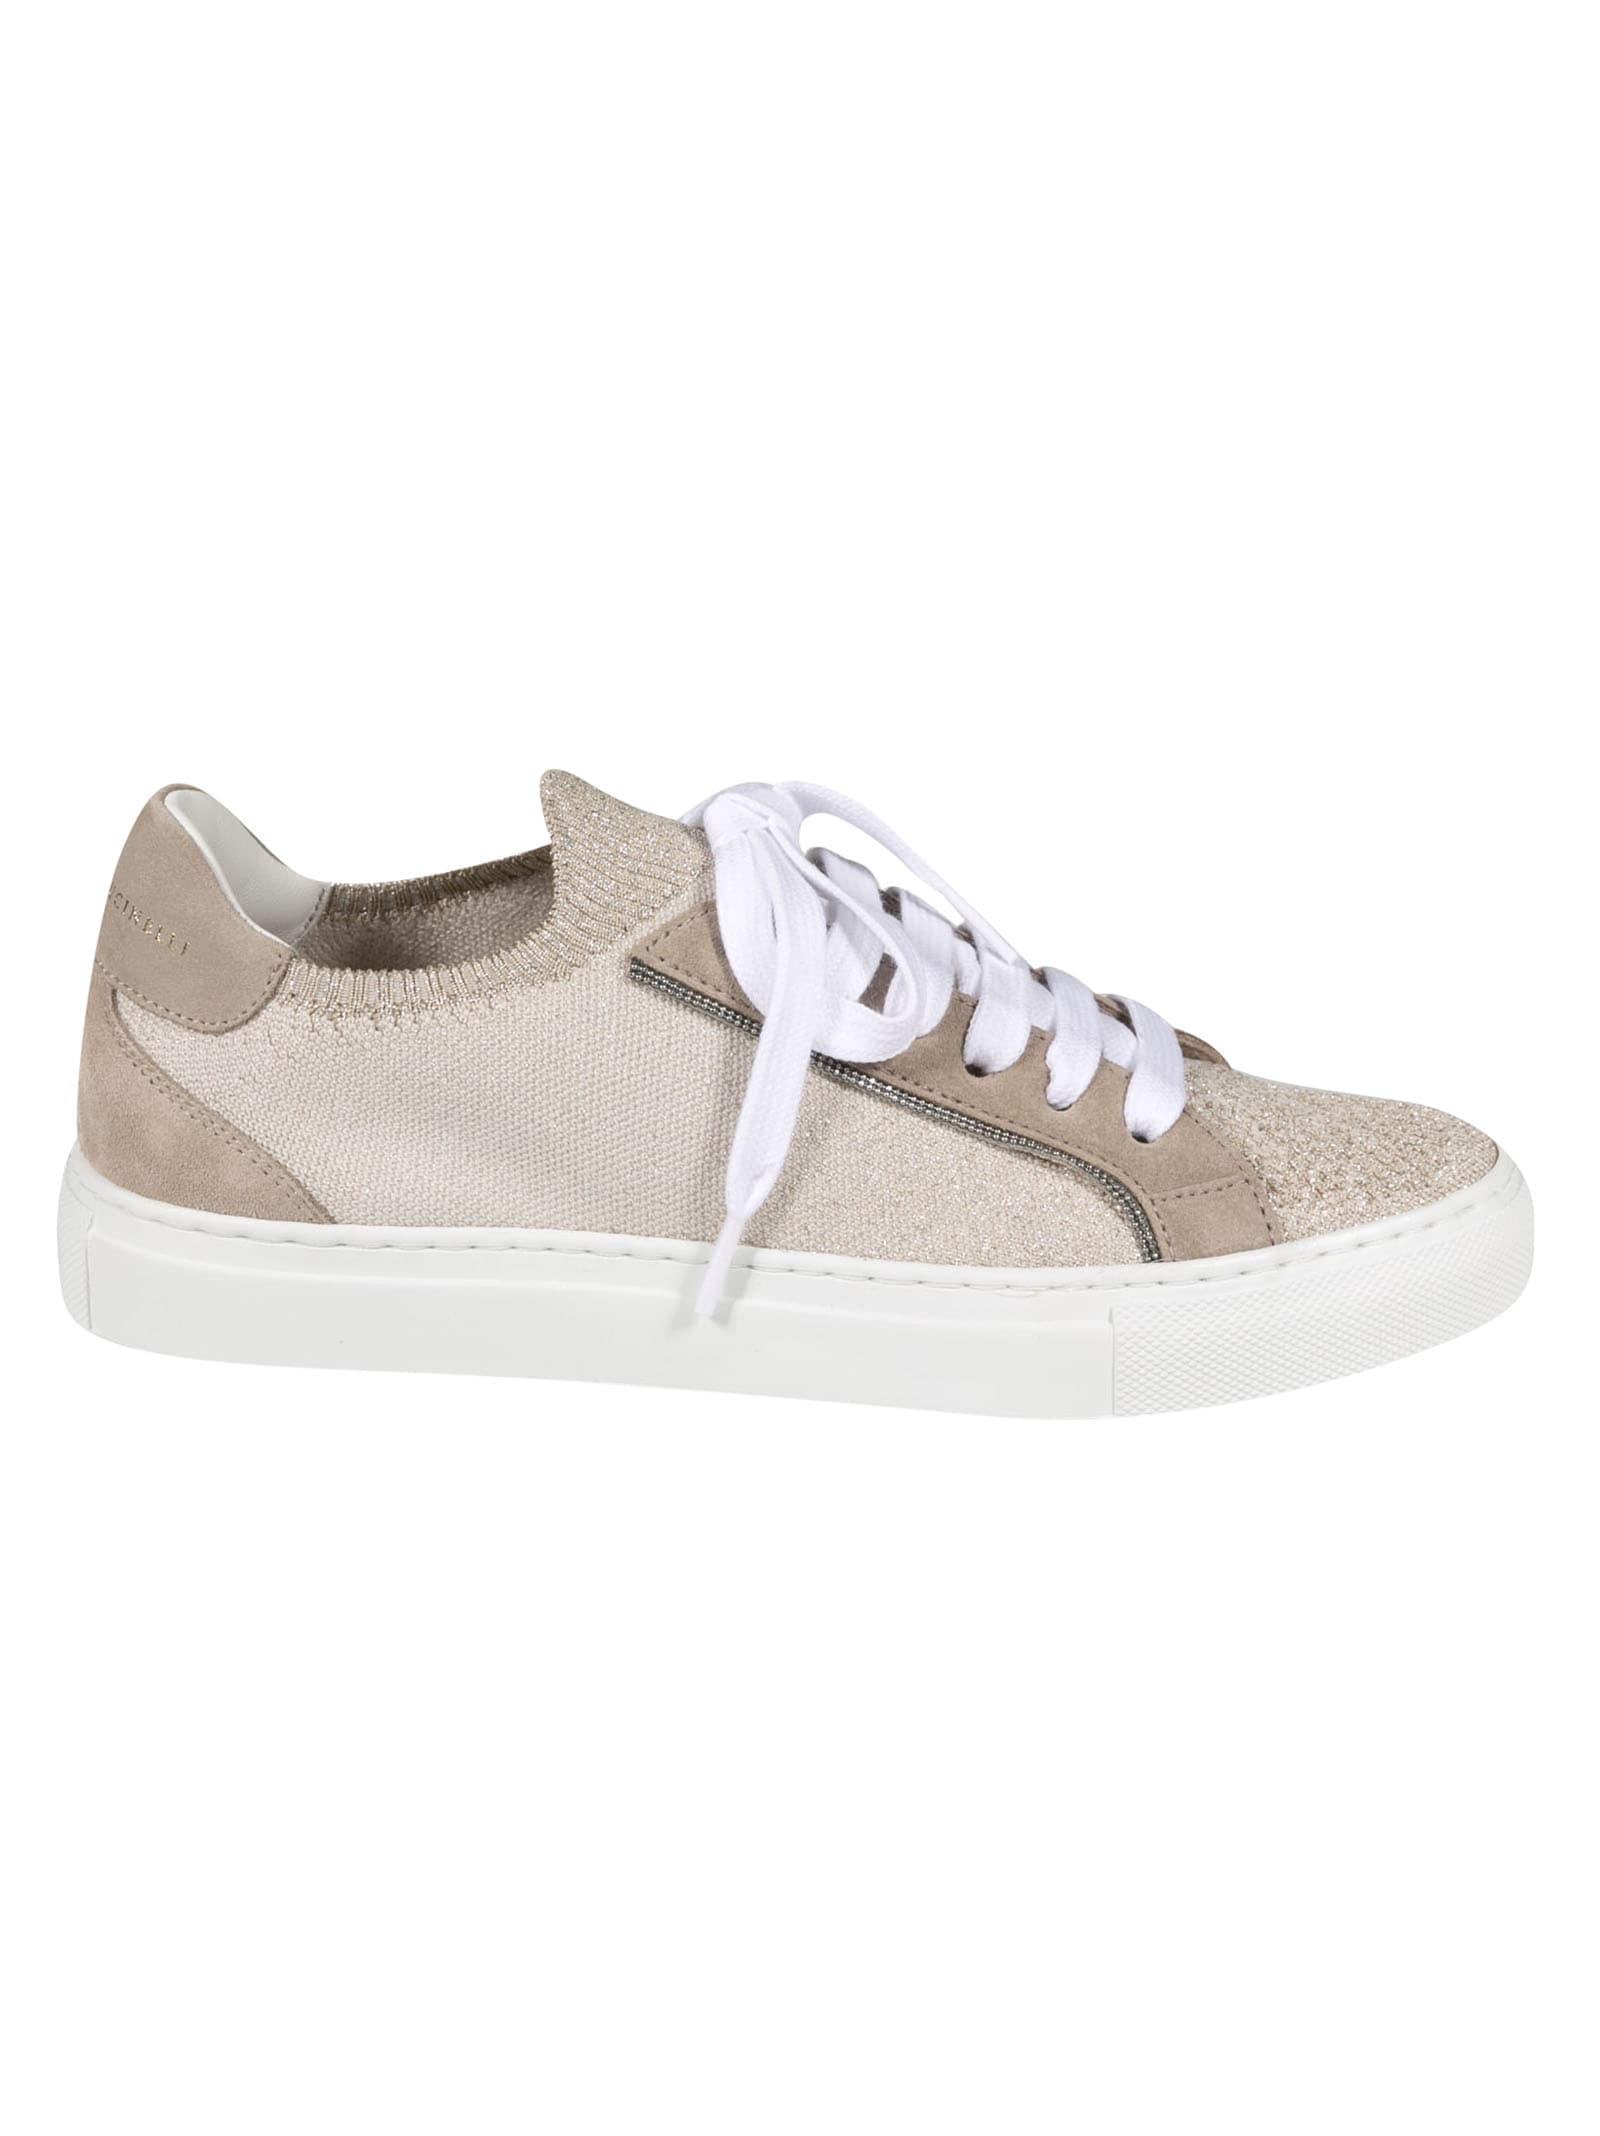 BRUNELLO CUCINELLI CLASSIC LOW-TOP LACE-UP trainers,MZ34G1335-C1266